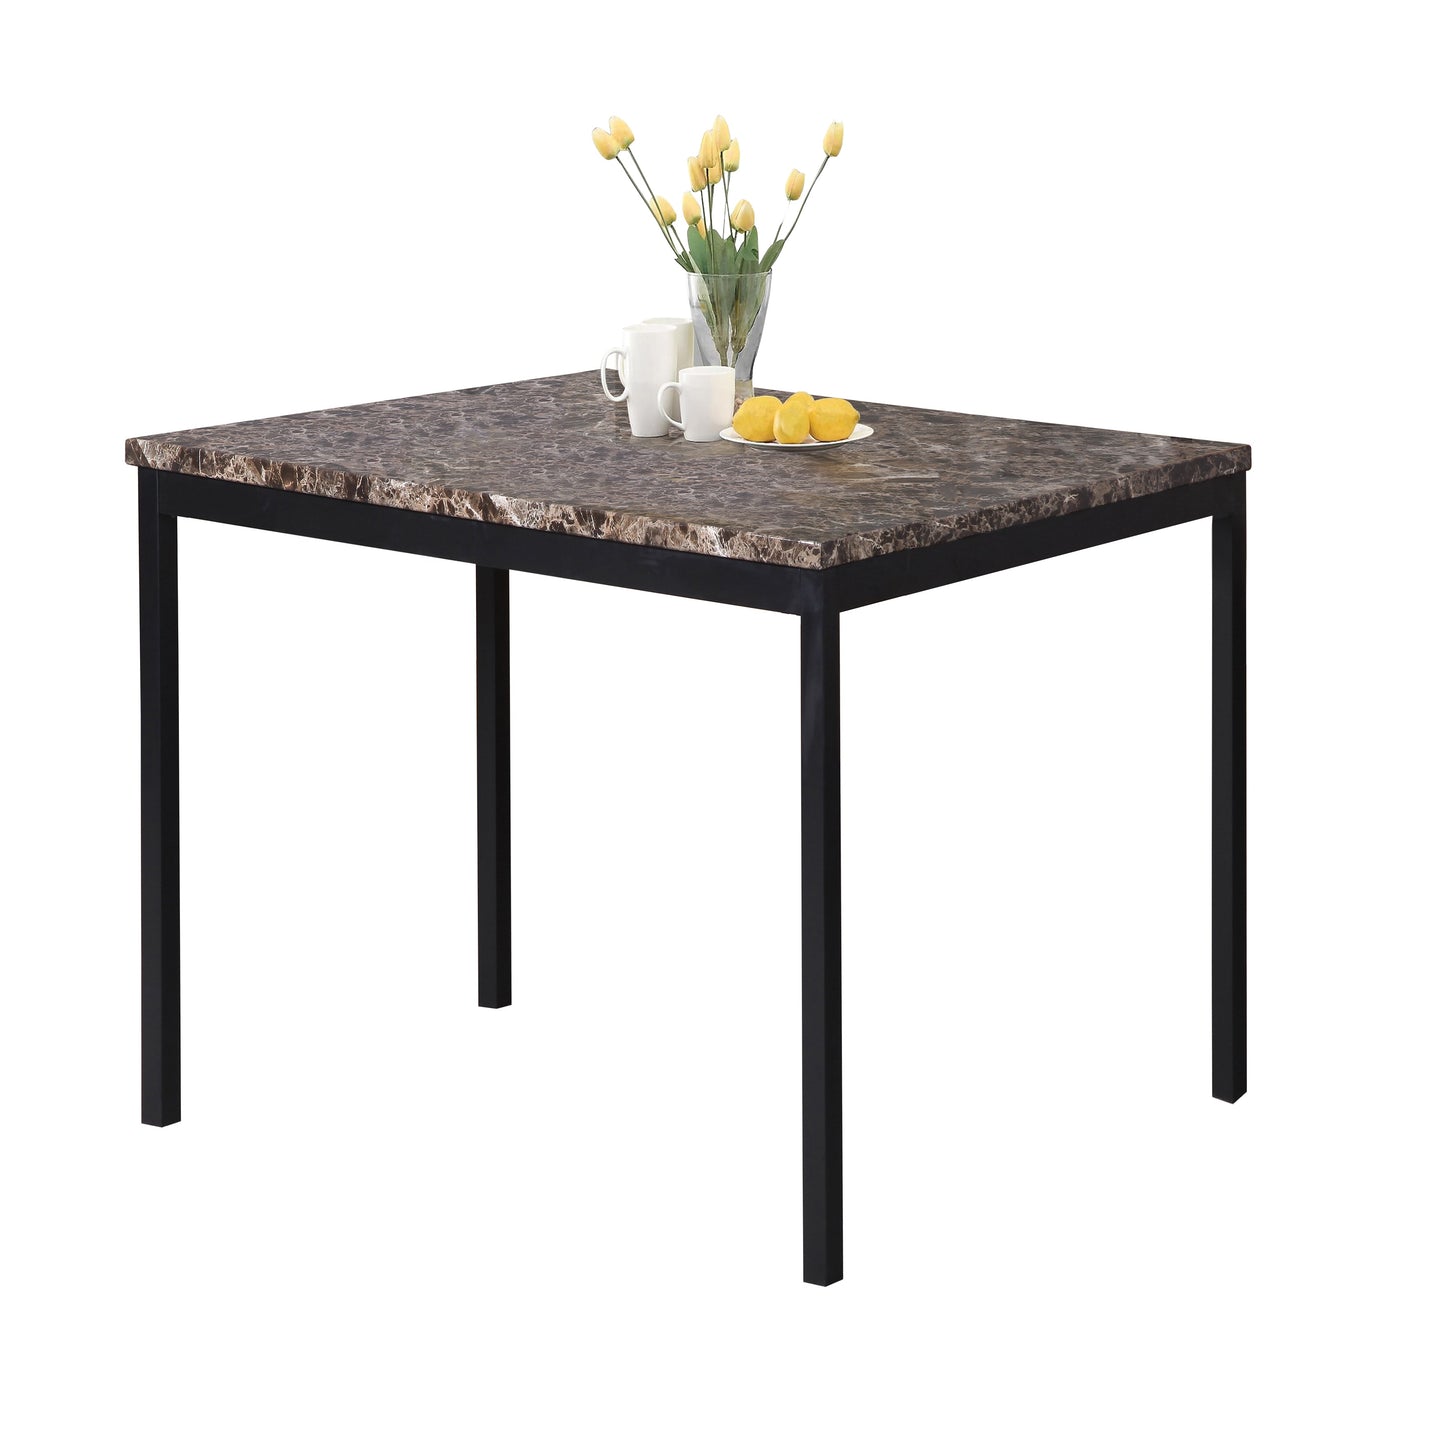 Citico Metal Counter Height Dining Table with Laminated Faux Marble Top, Black